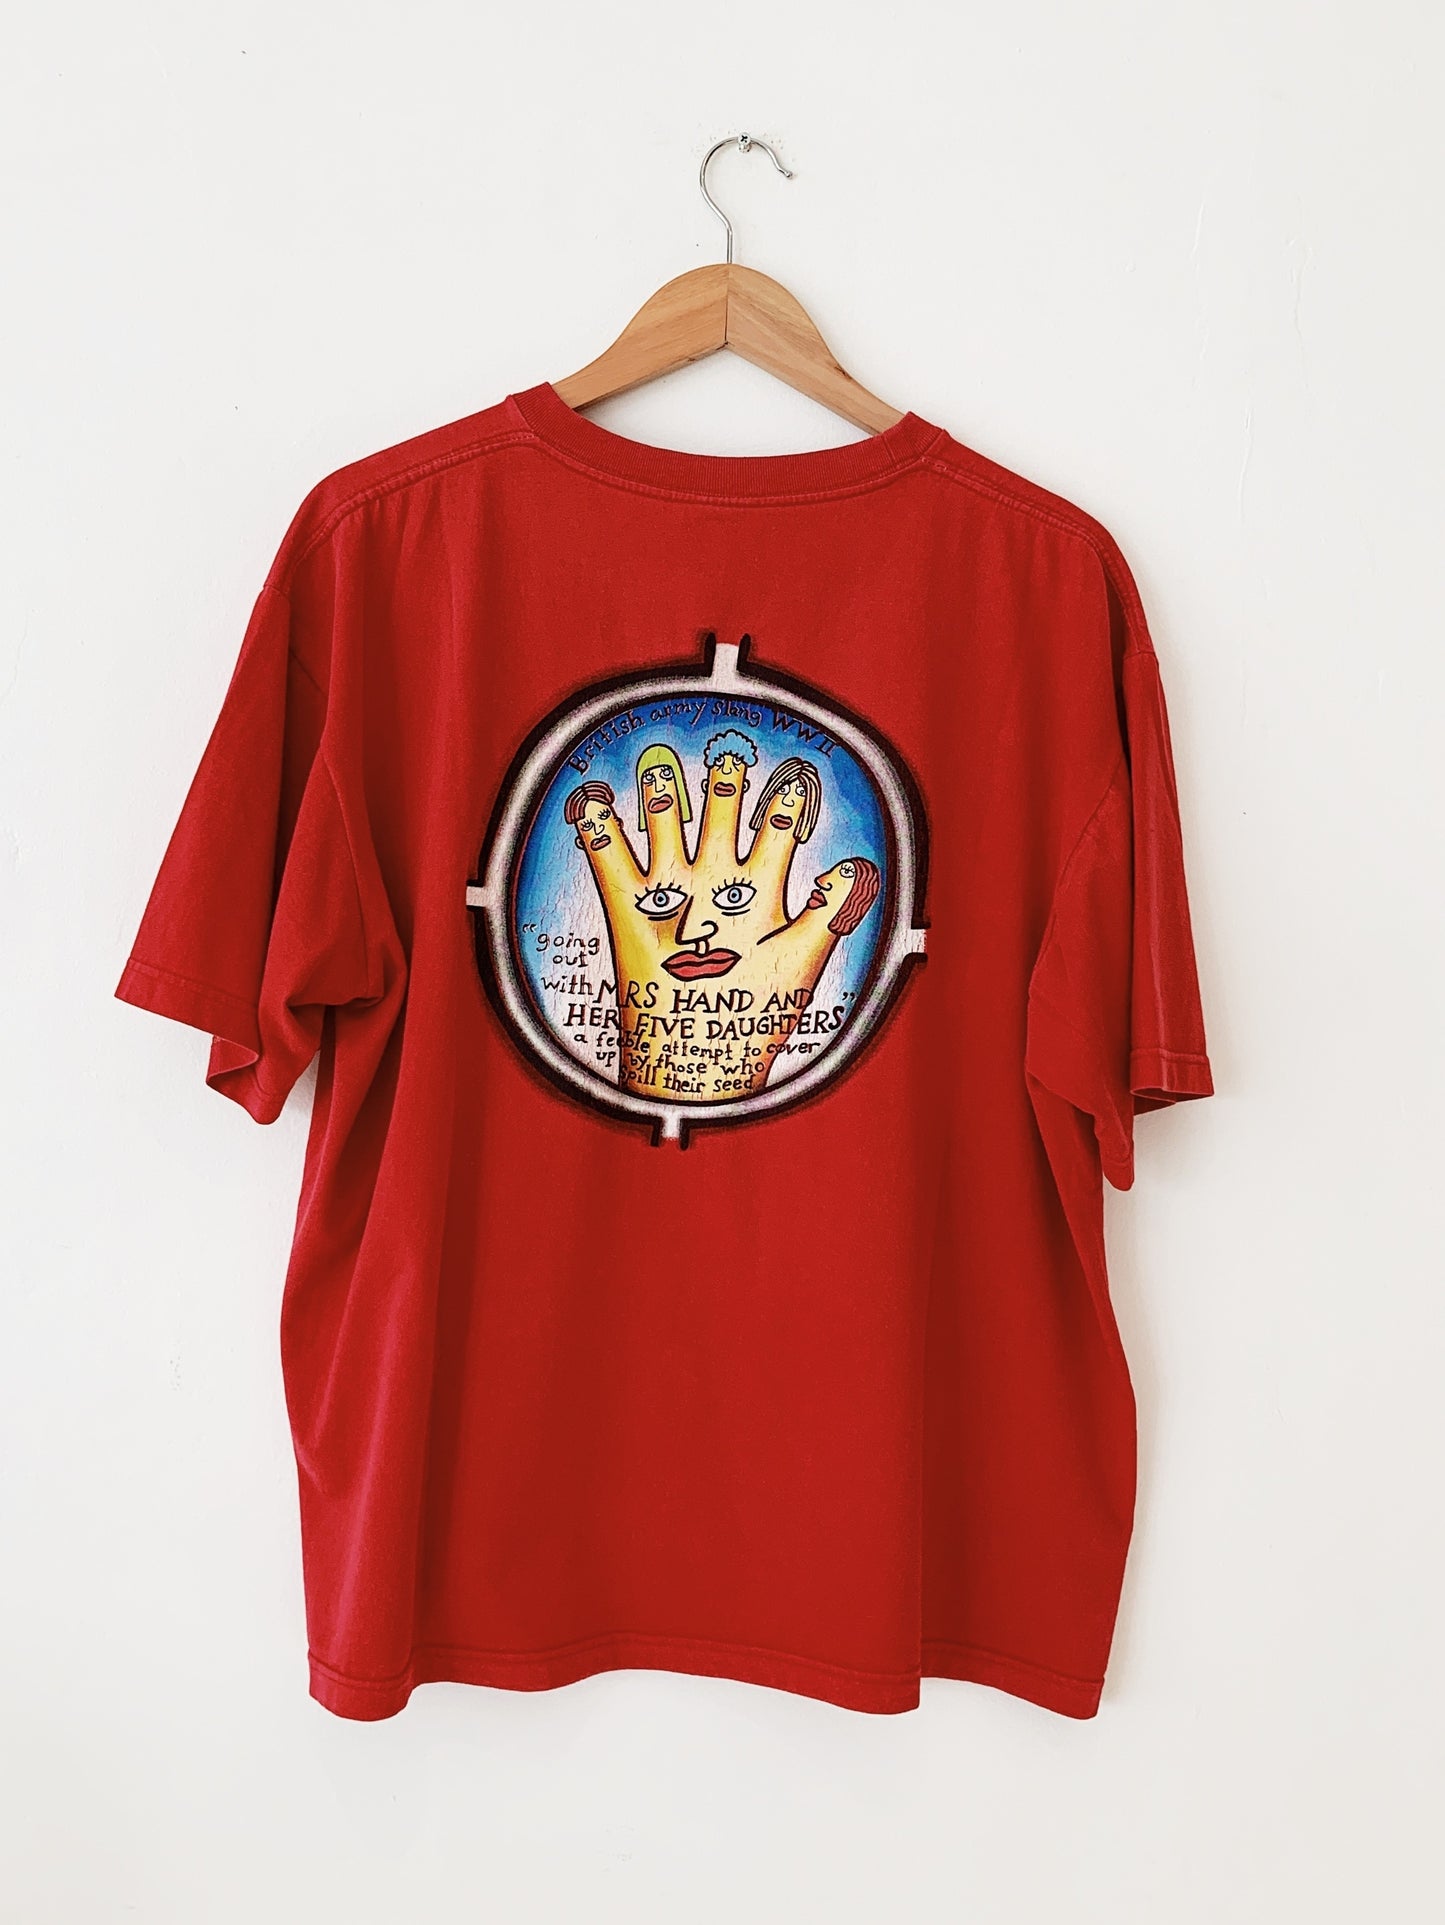 Vintage Reg Mombassa for Mambo "Mrs Hand and Her Five Daughters" '96 T-Shirt